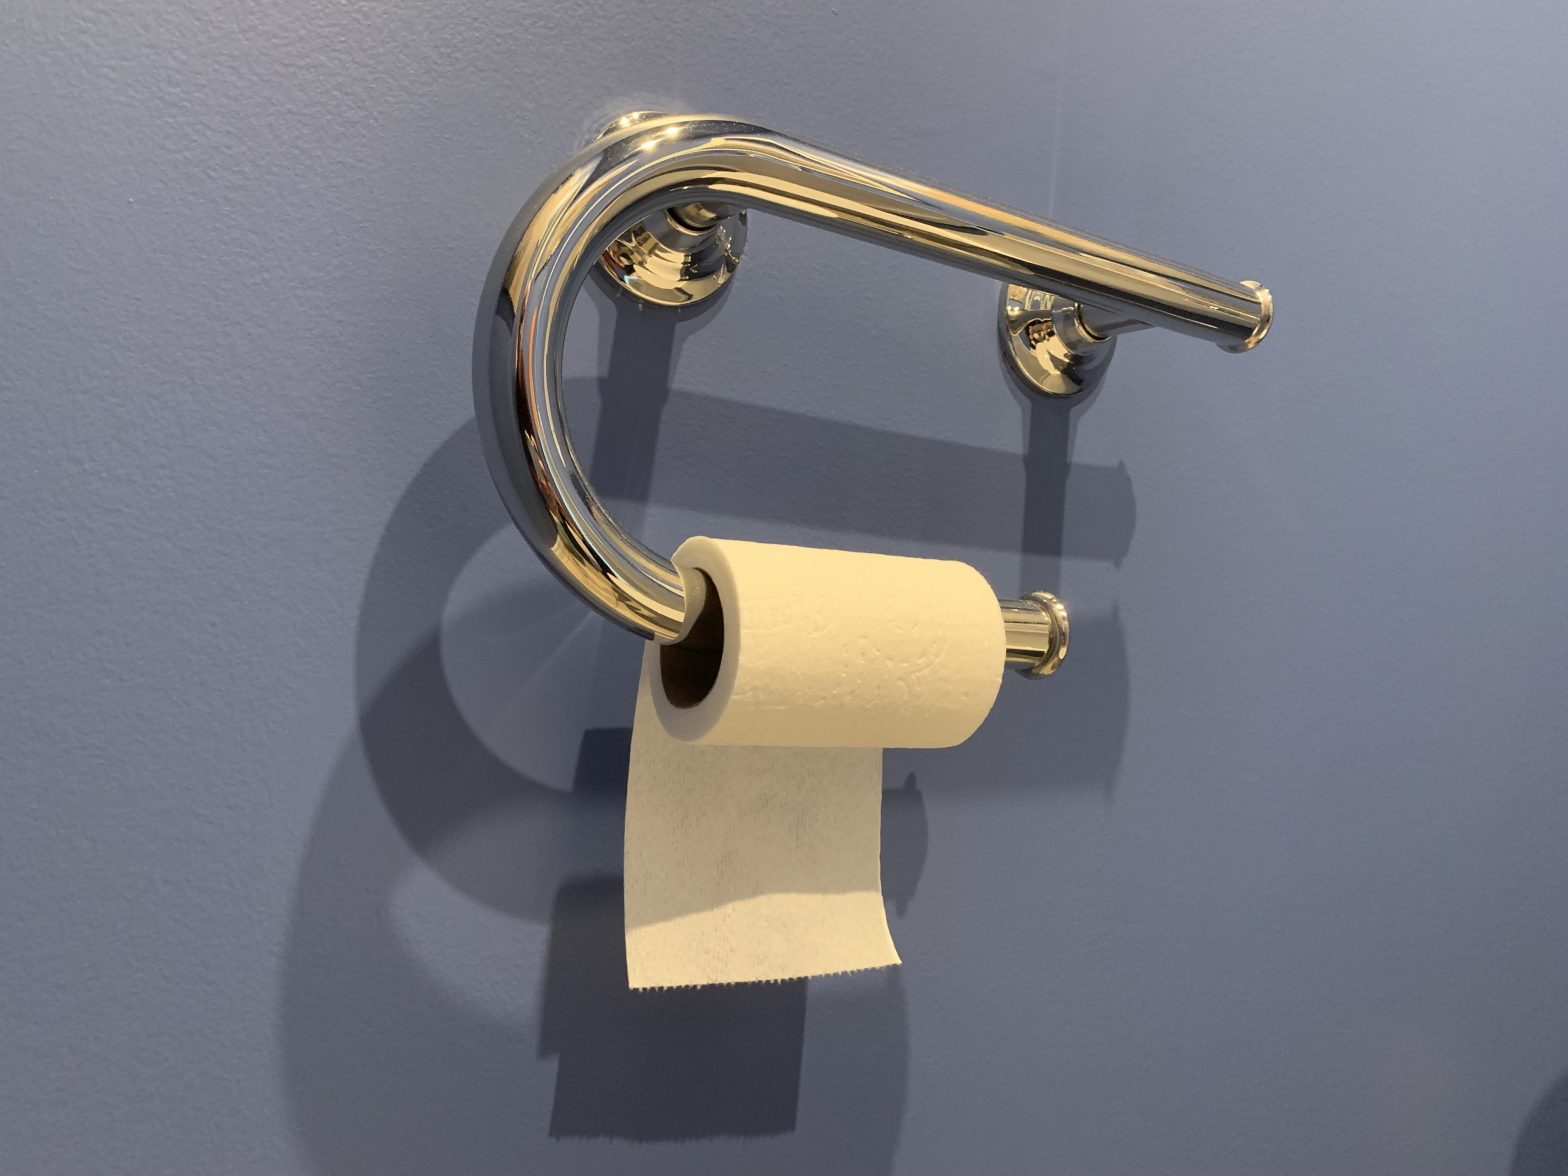 The BEST toilet paper holder for powder rooms, guest bathrooms, or water closets